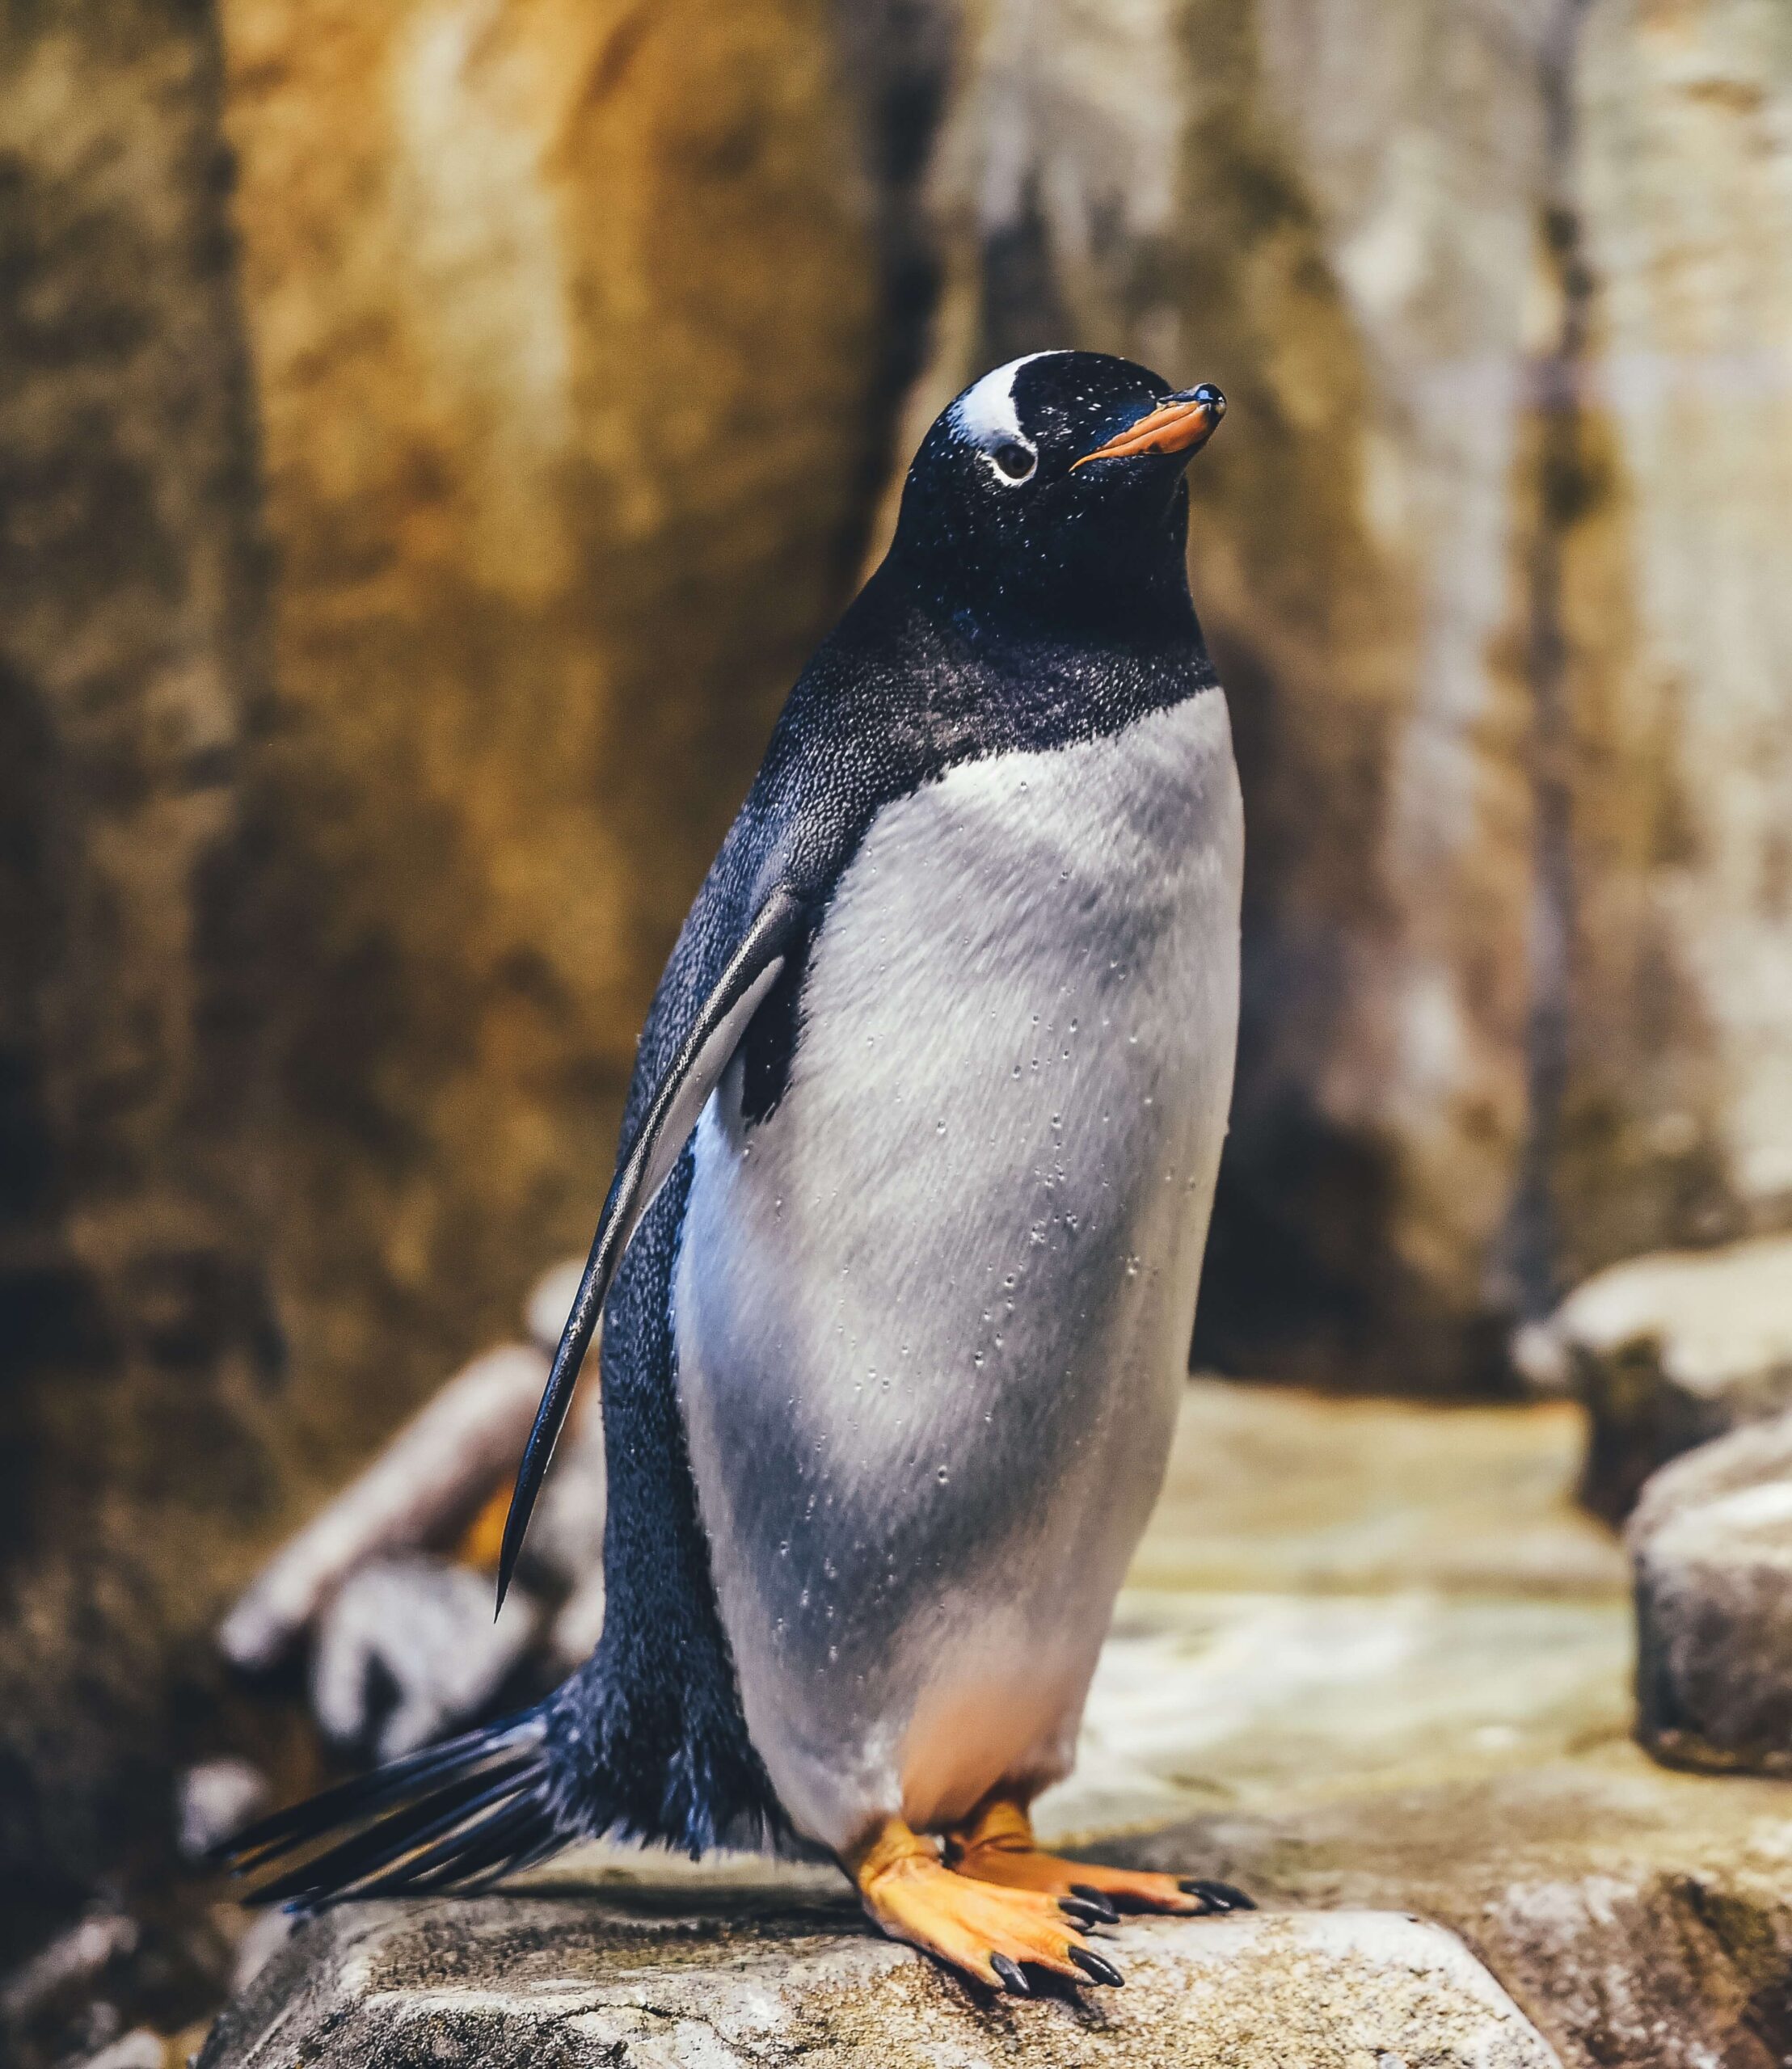 Image of a penguin